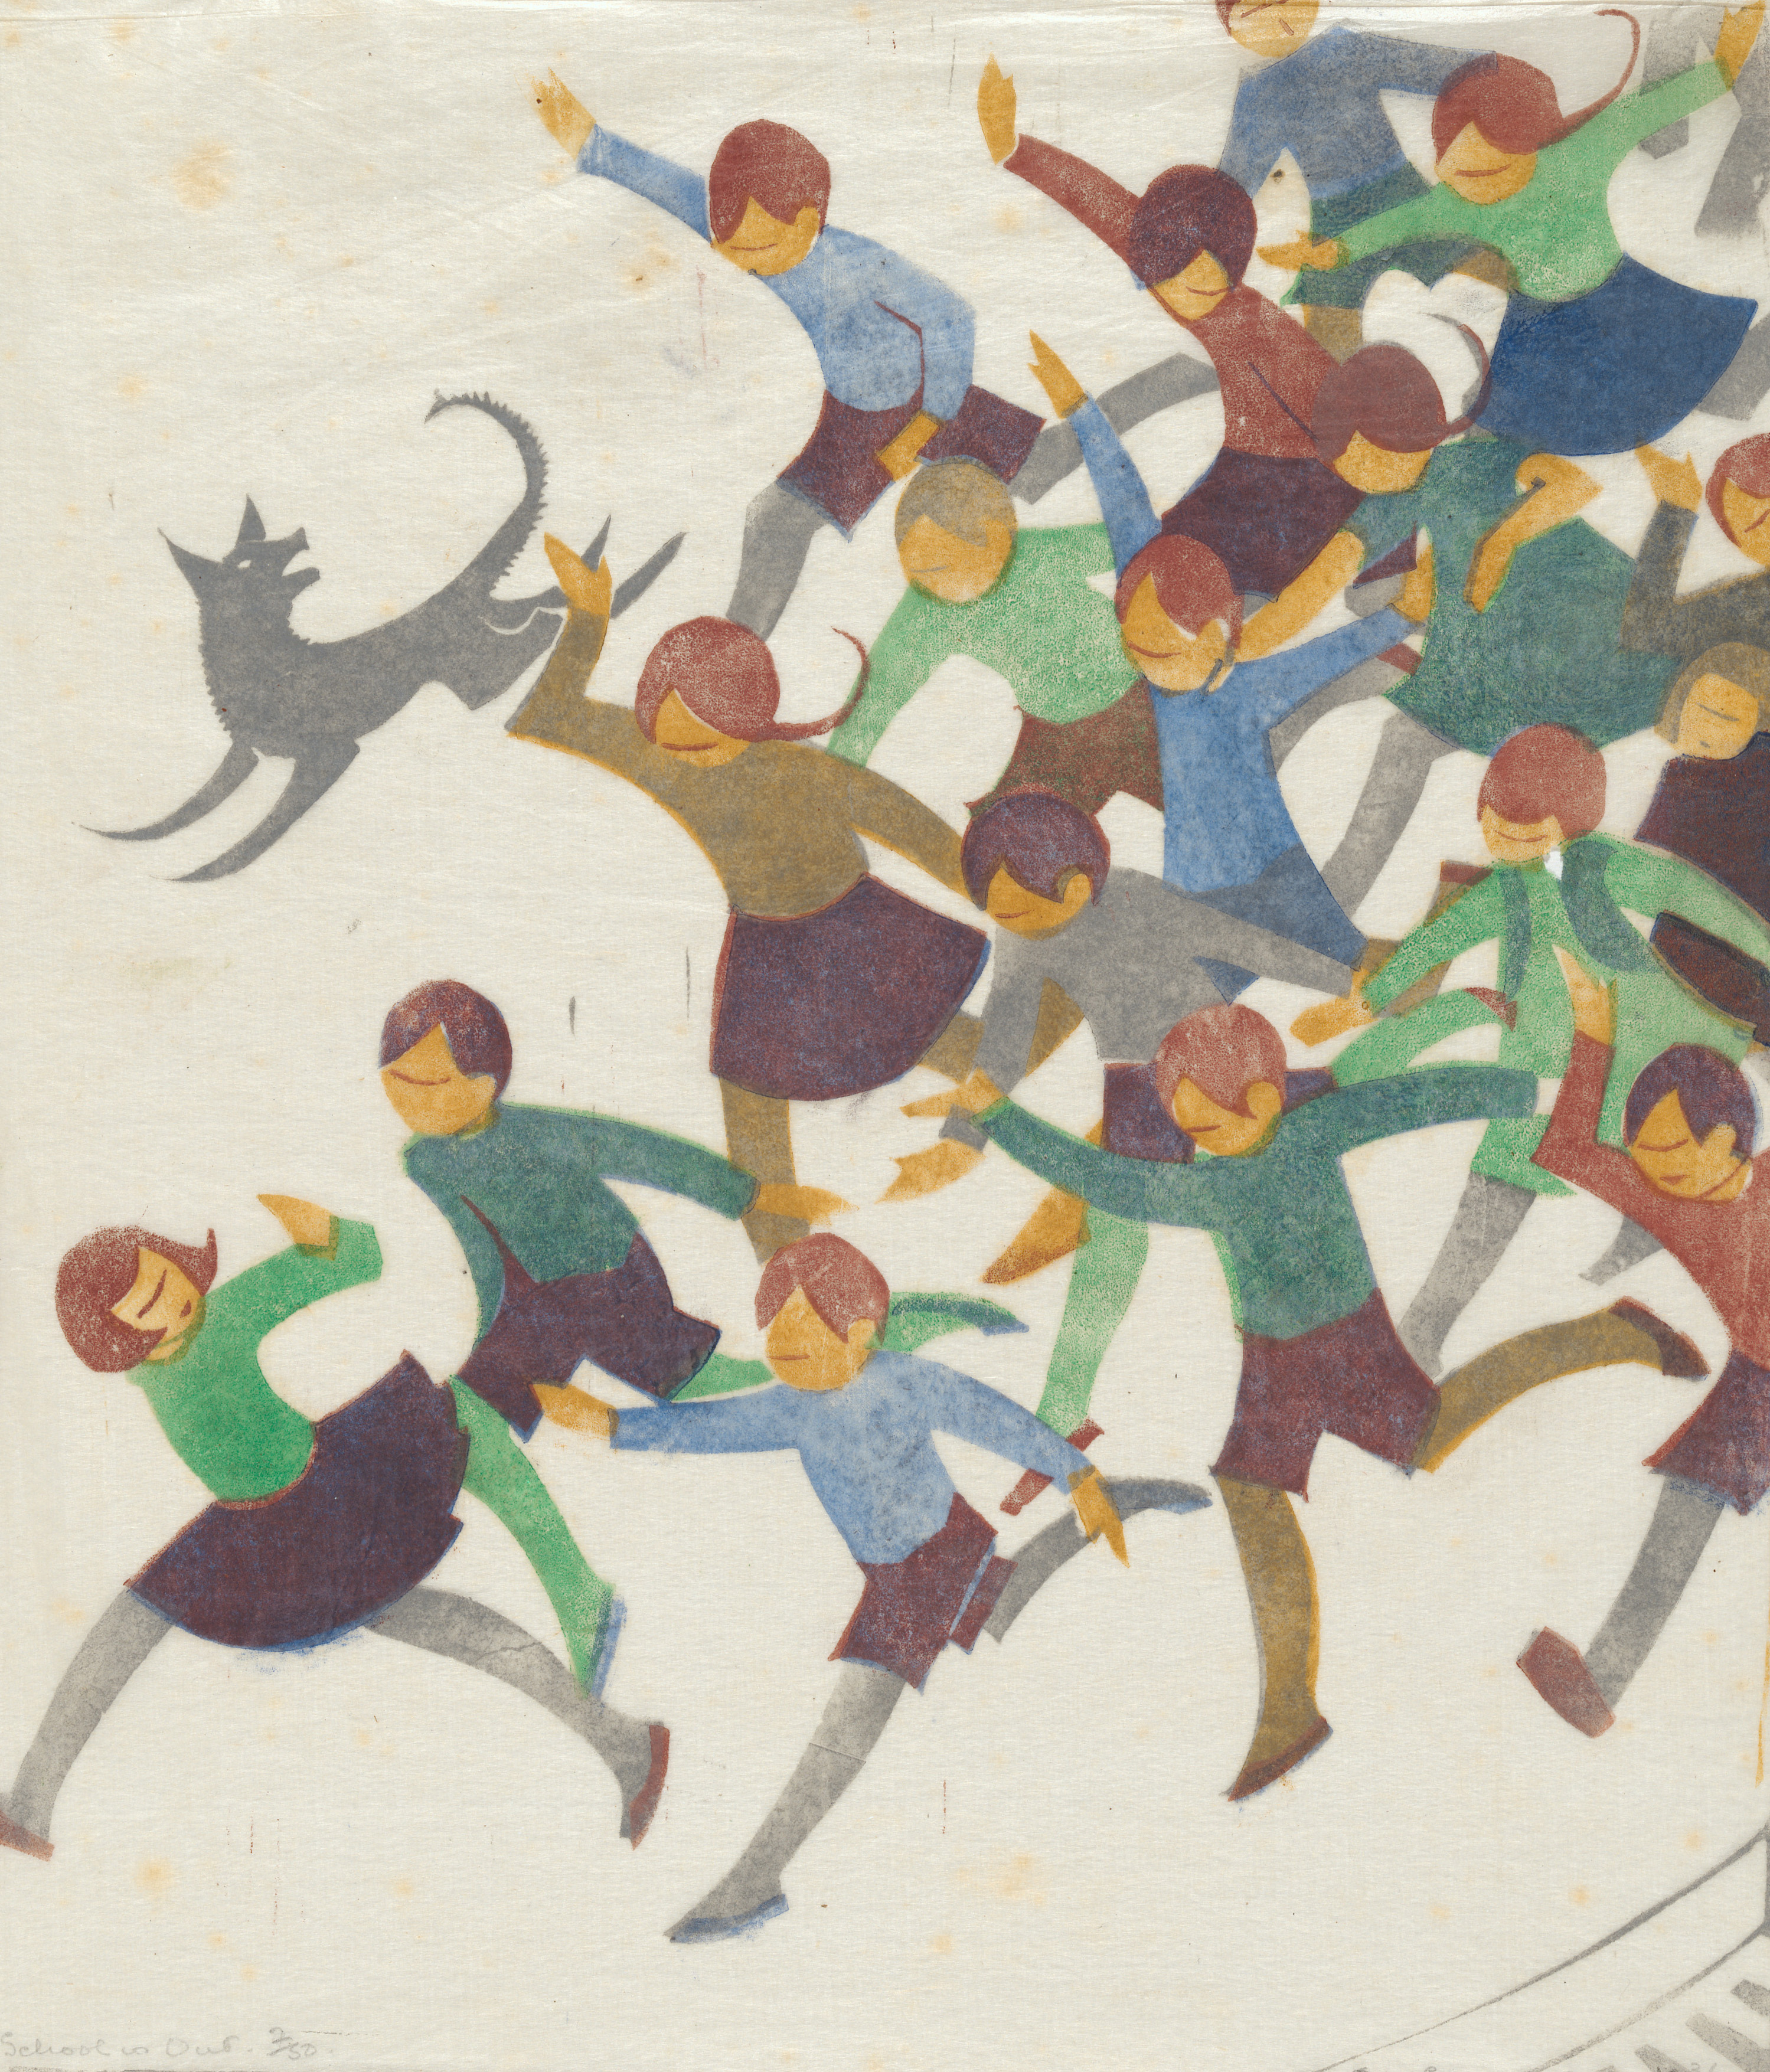 Ethel Spowers, <em>School is out</em>, 1936, linocut, printed in colour inks, from five blocks. National Gallery of Australia, Kamberri/Canberra. Purchased 1976